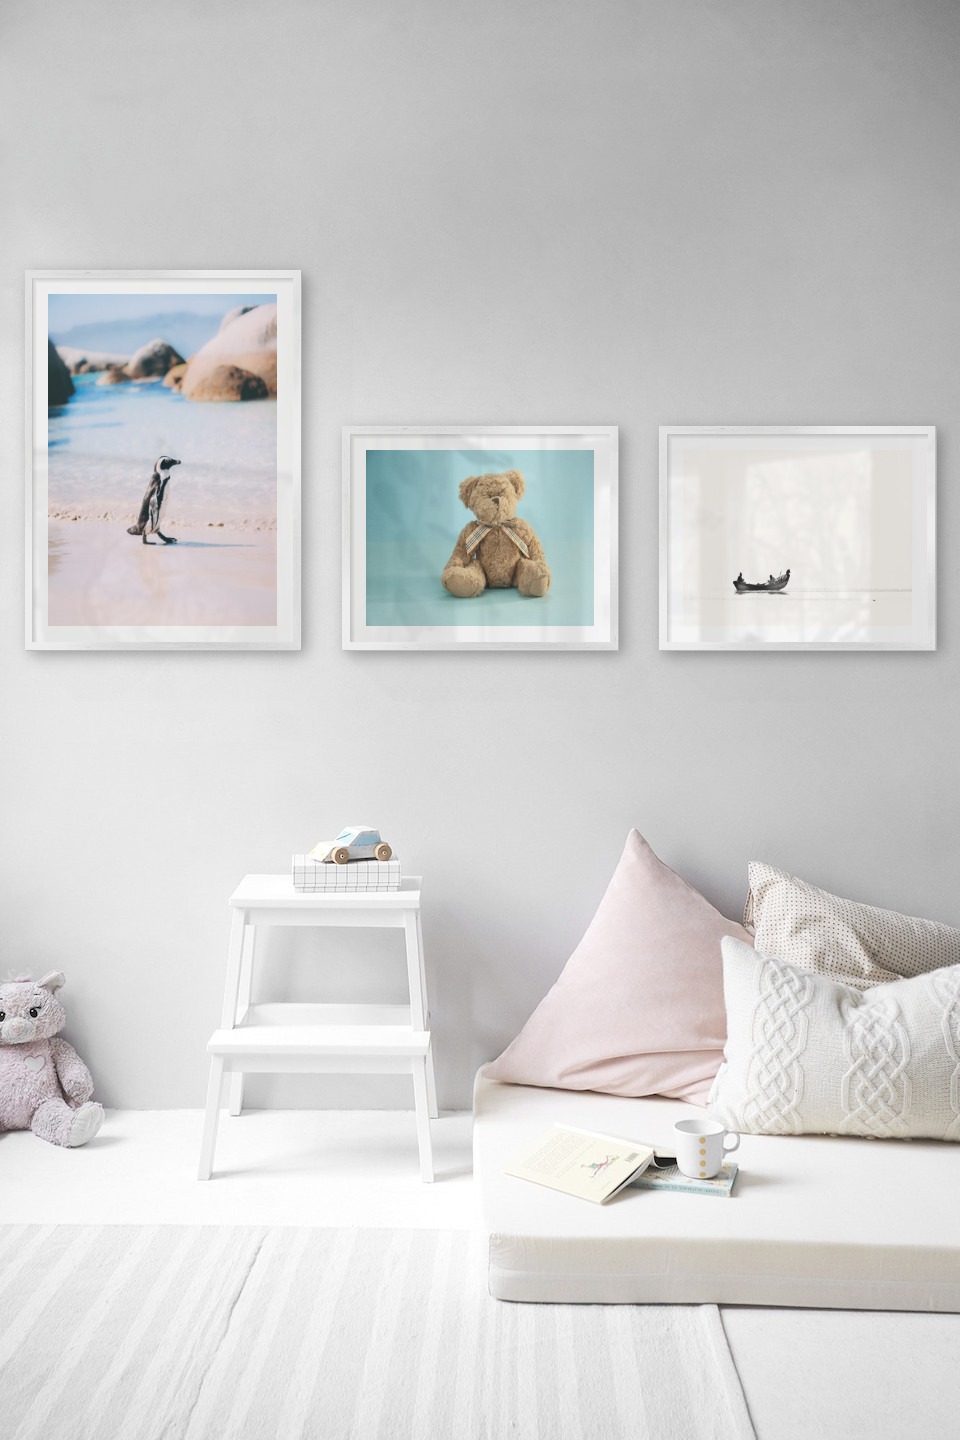 Gallery wall with picture frames in silver in sizes 50x70 and 40x50 with prints "Penguin on the beach", "Teddy bear and blue" and "People in boat"